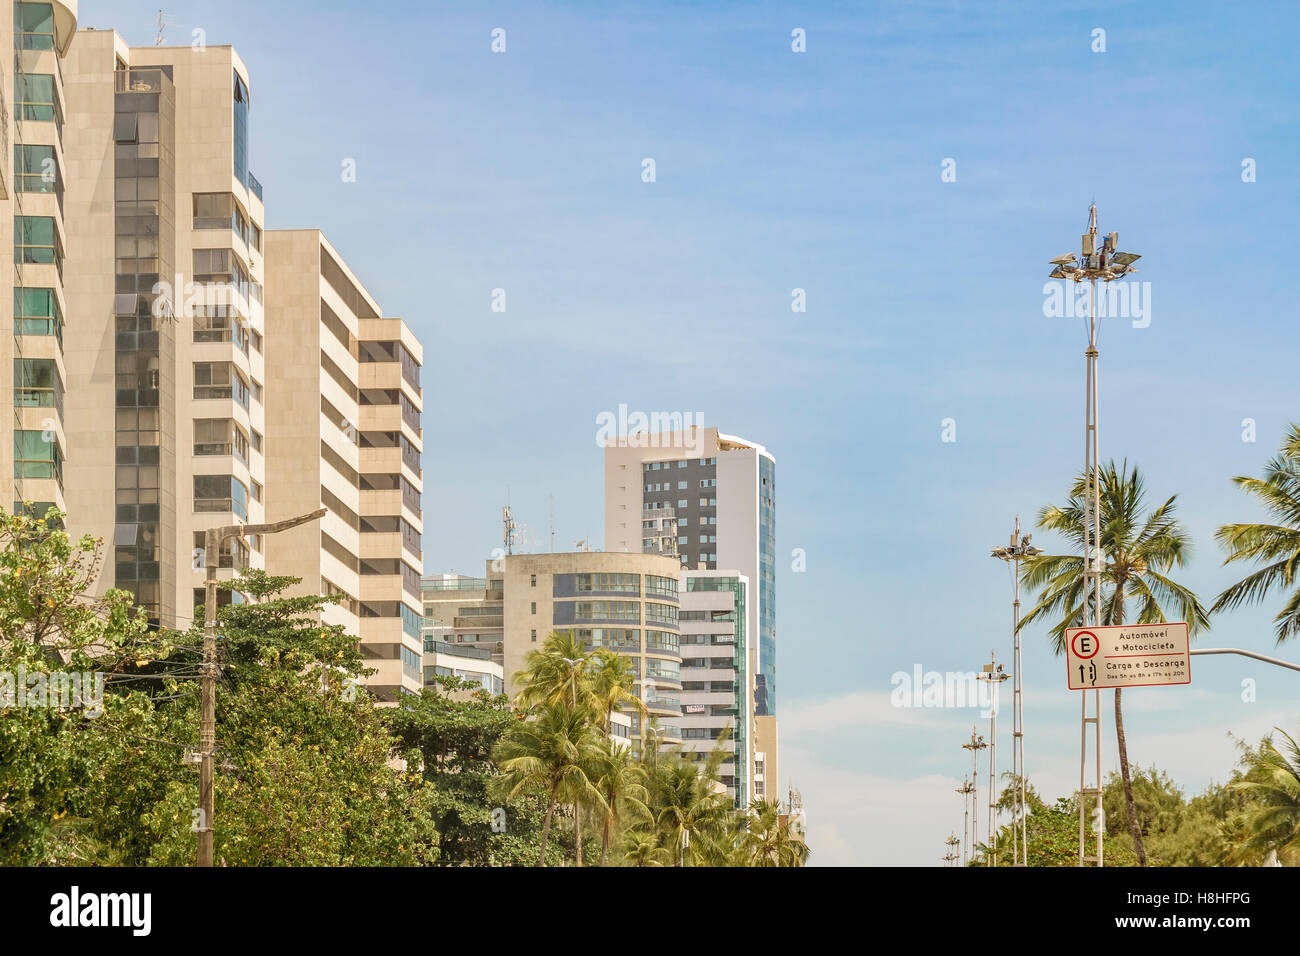 RECIFE, BRAZIL, JANUARY - 2016 - Low angle view of modern buildings against blue sky in Recife city, Brazil Stock Photo